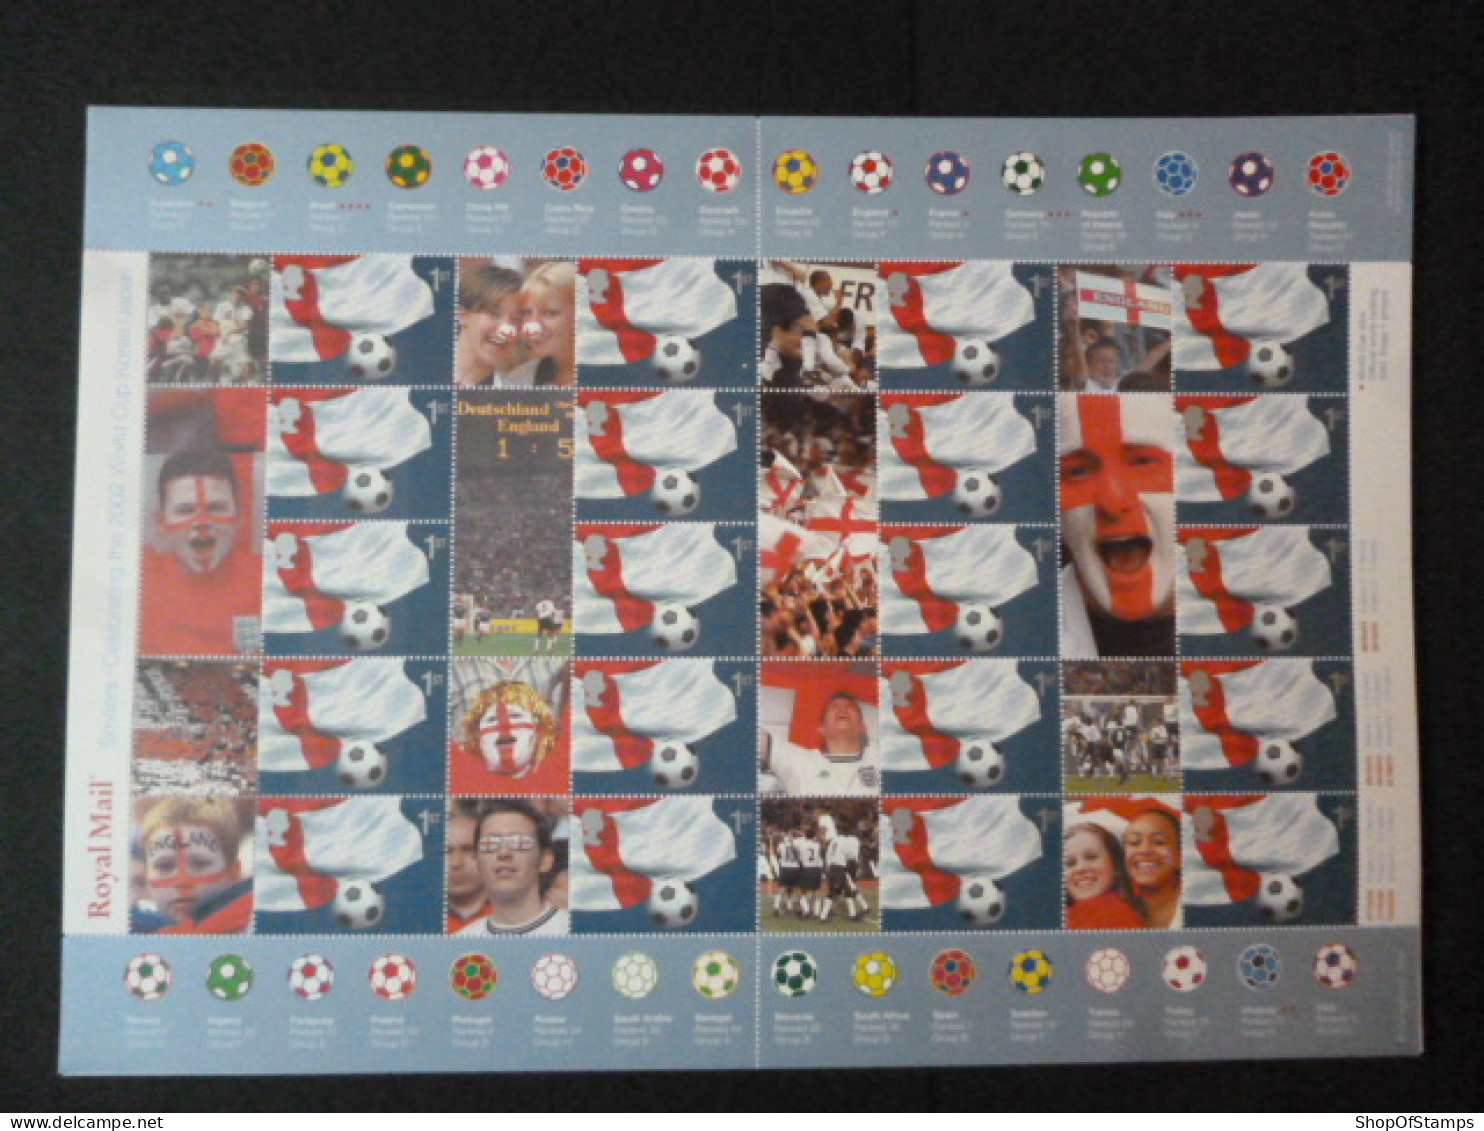 GREAT BRITAIN SG 2294 20 STAMPS SMILER SHEET WITH GUTTERS & LABELS - Sheets, Plate Blocks & Multiples